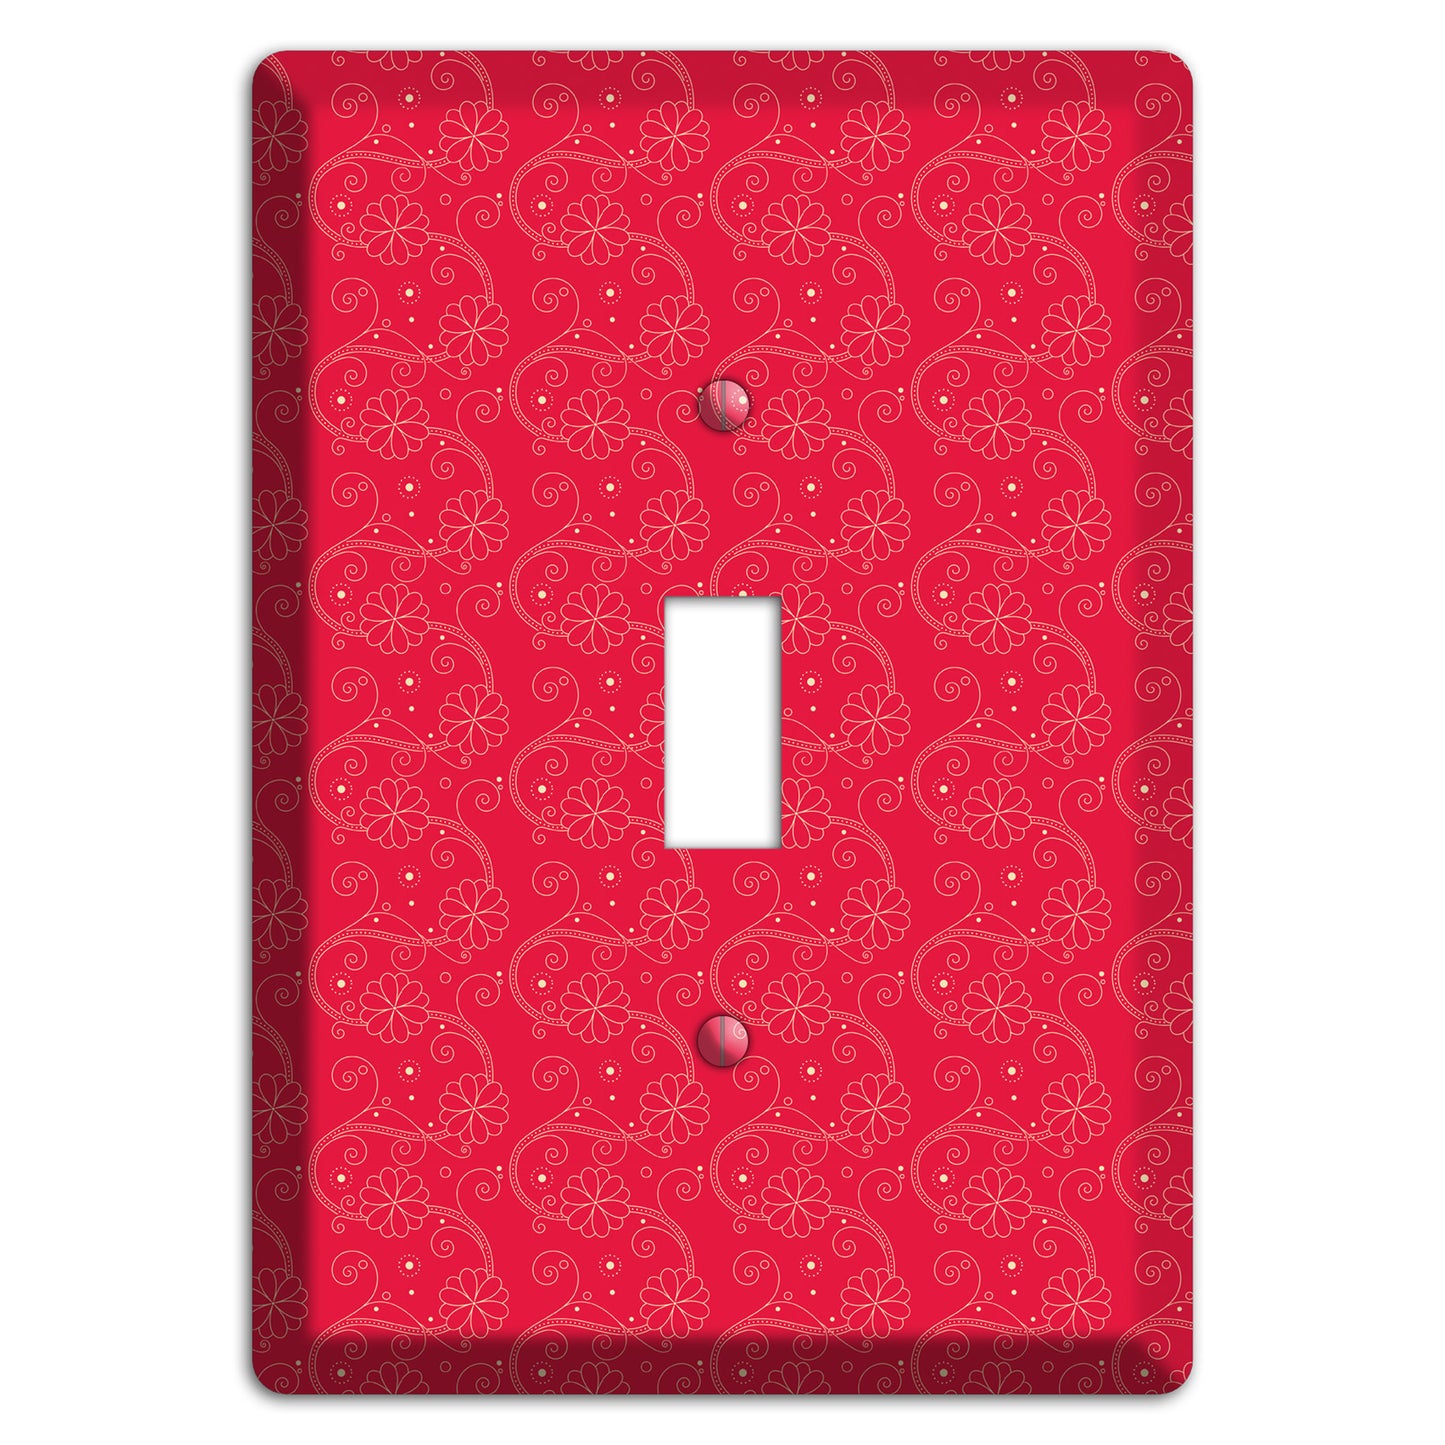 Tiny Red Floral Swirl Cover Plates